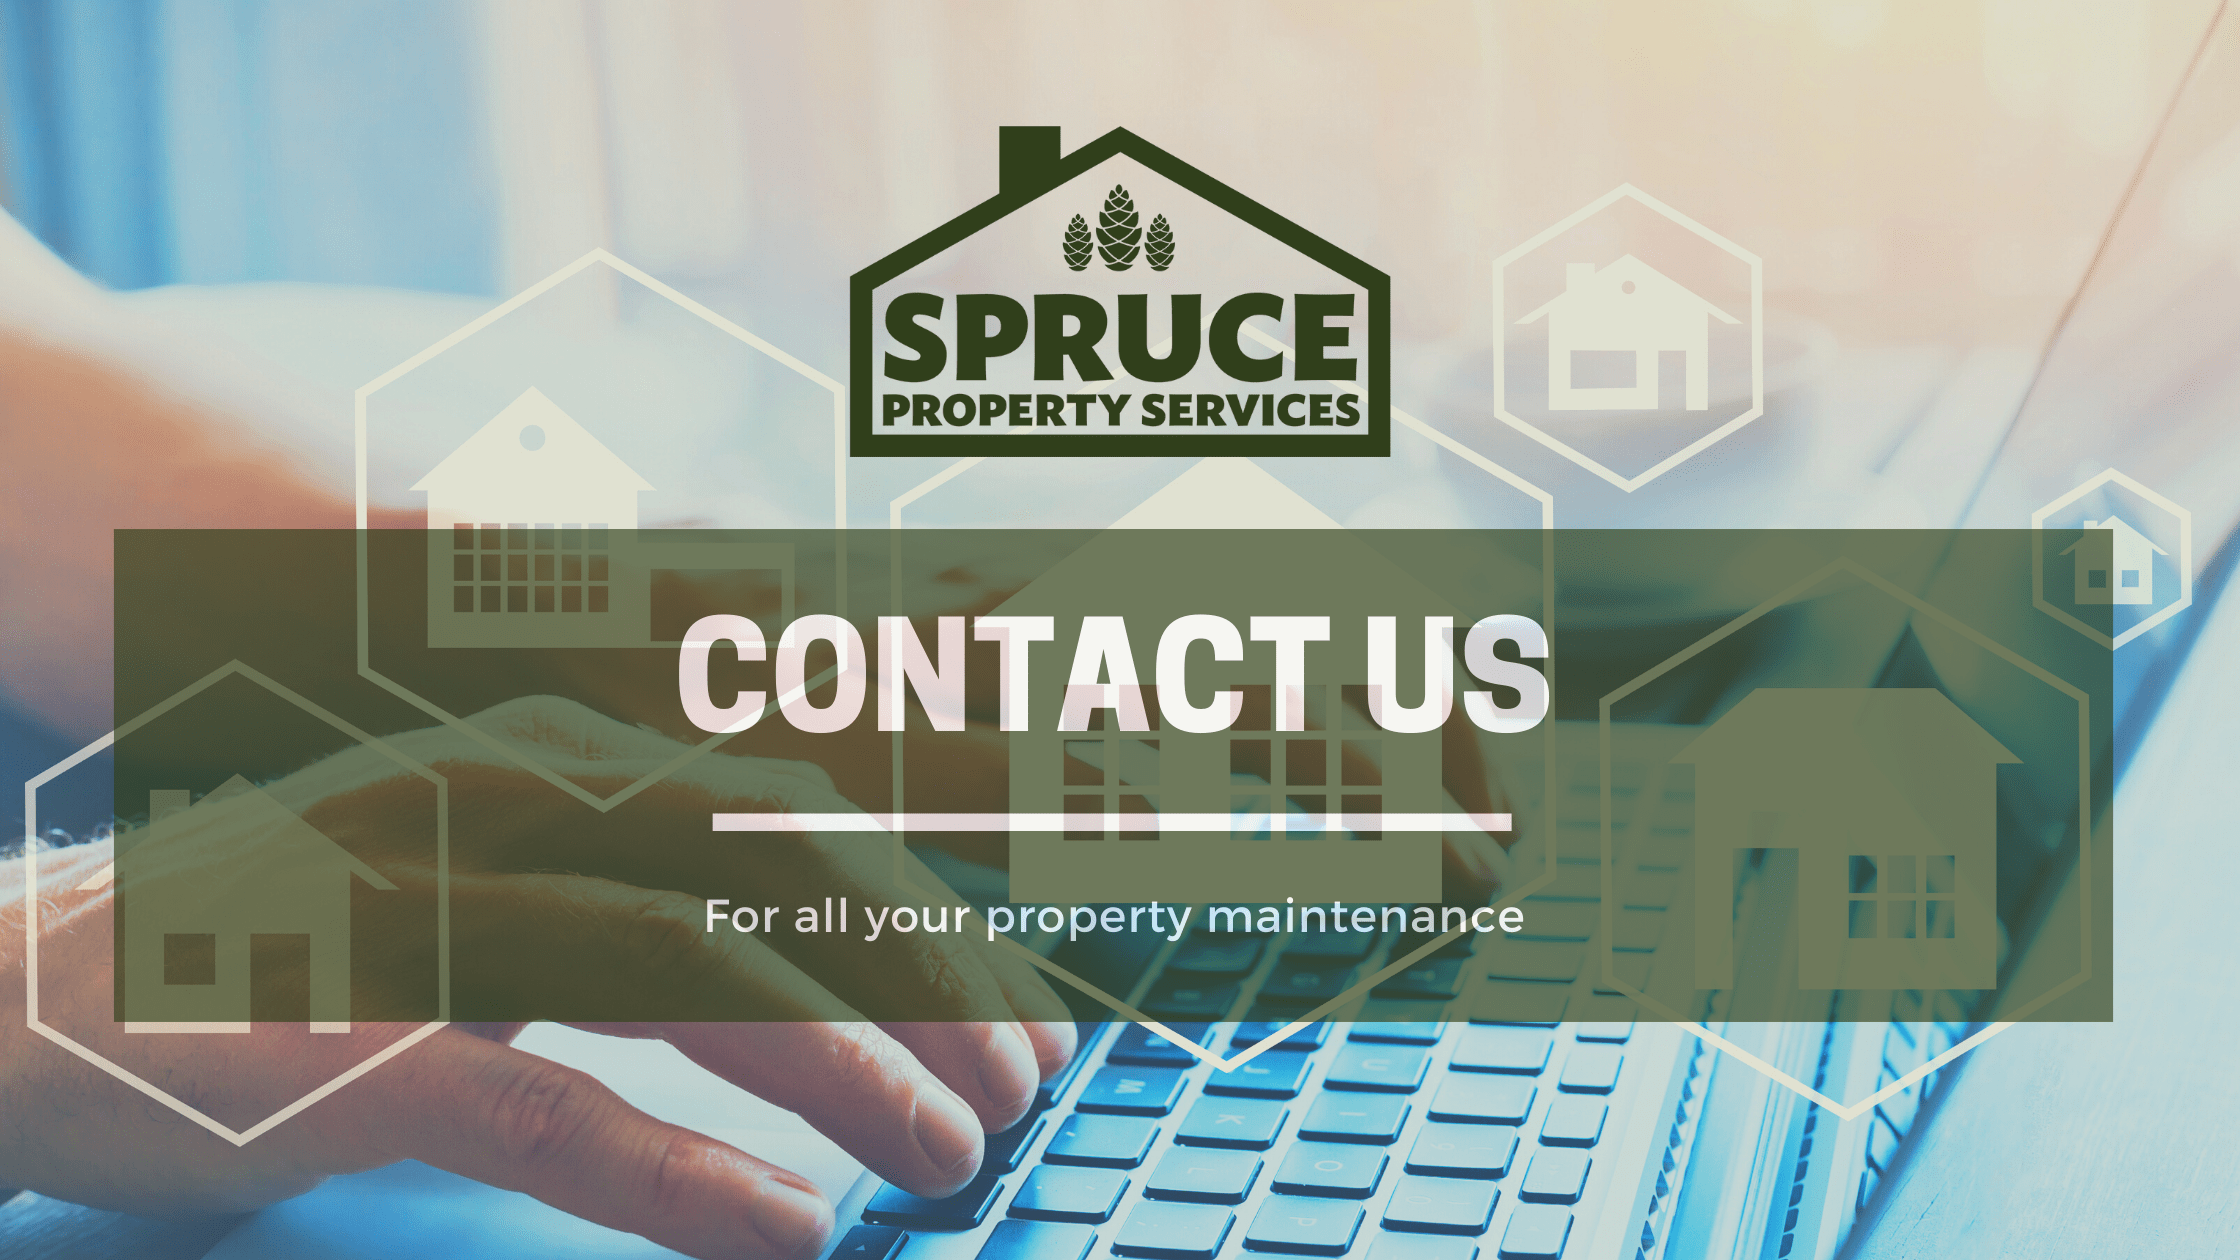 The sprucepeople contact us